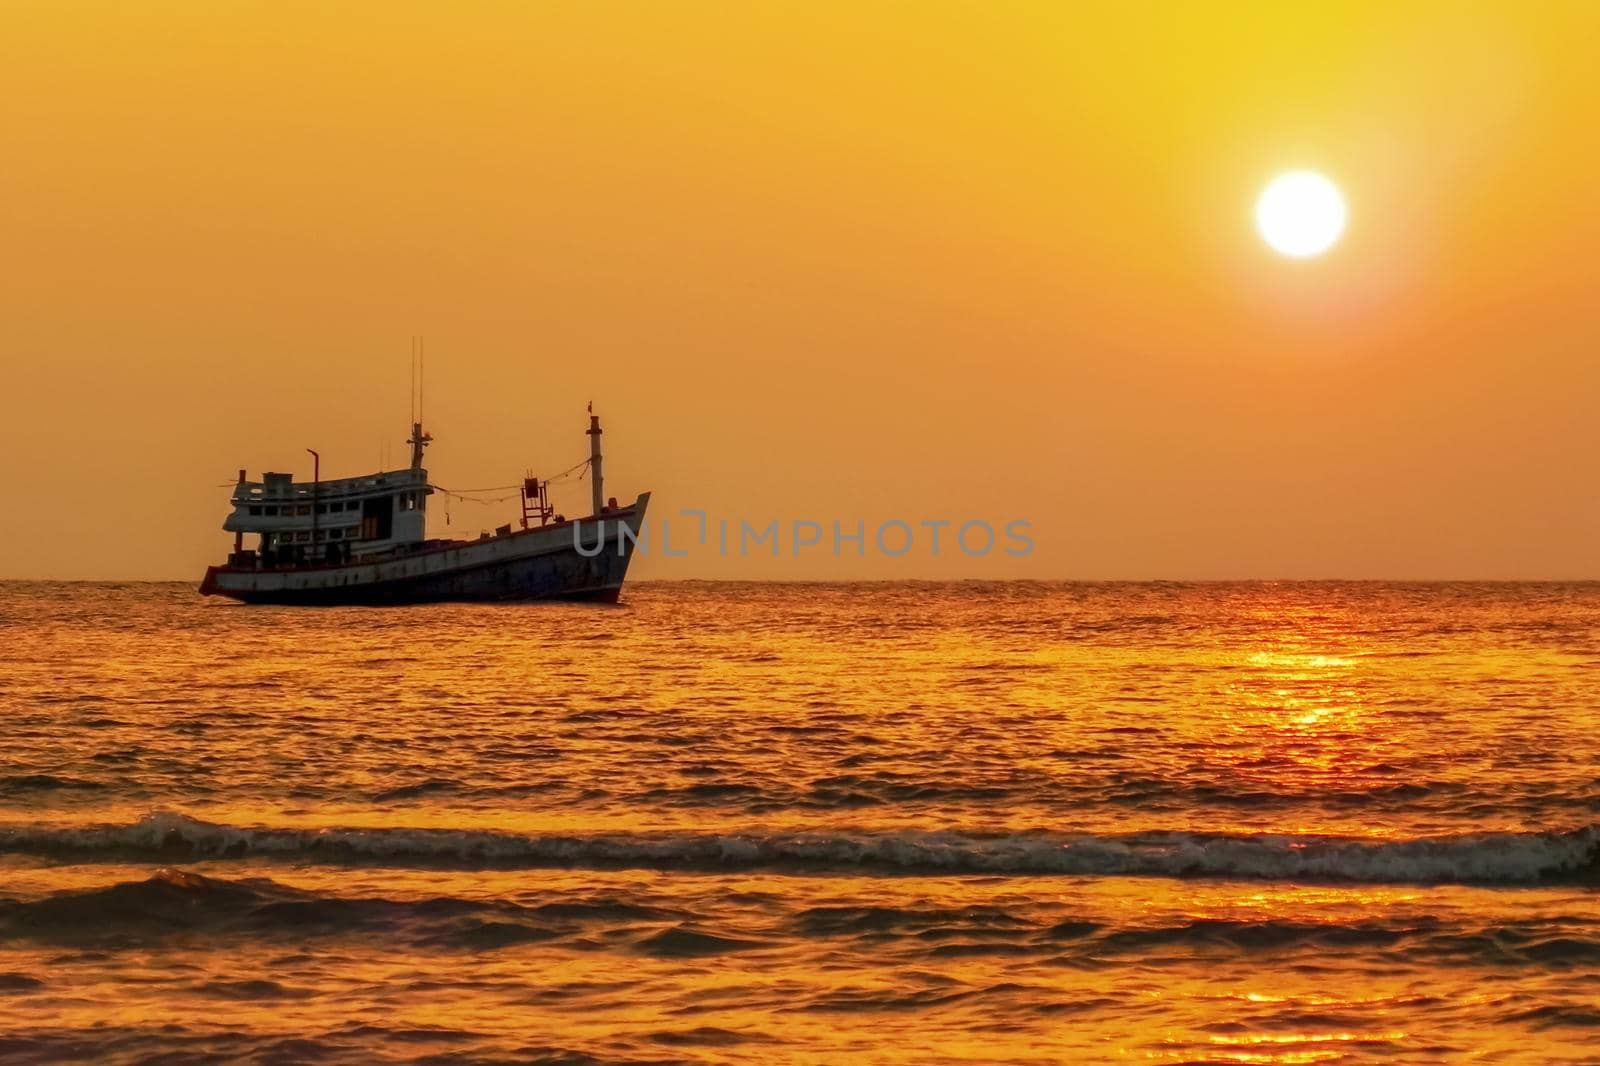 Fishing boat at sea on the horizon during sunset by Andre1ns